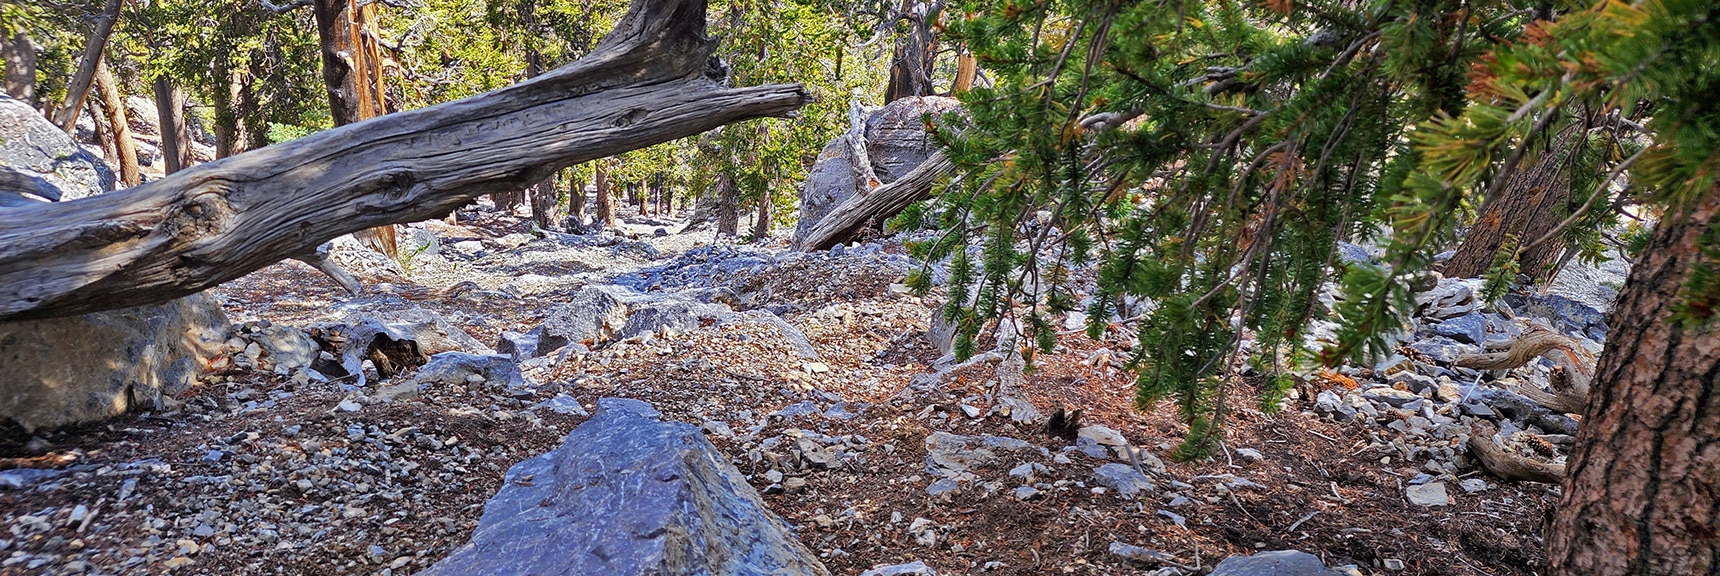 Descending Toward the Beginning of the Final Summit Approach | Sisters North | Lee Canyon | Mt Charleston Wilderness | Spring Mountains, Nevada